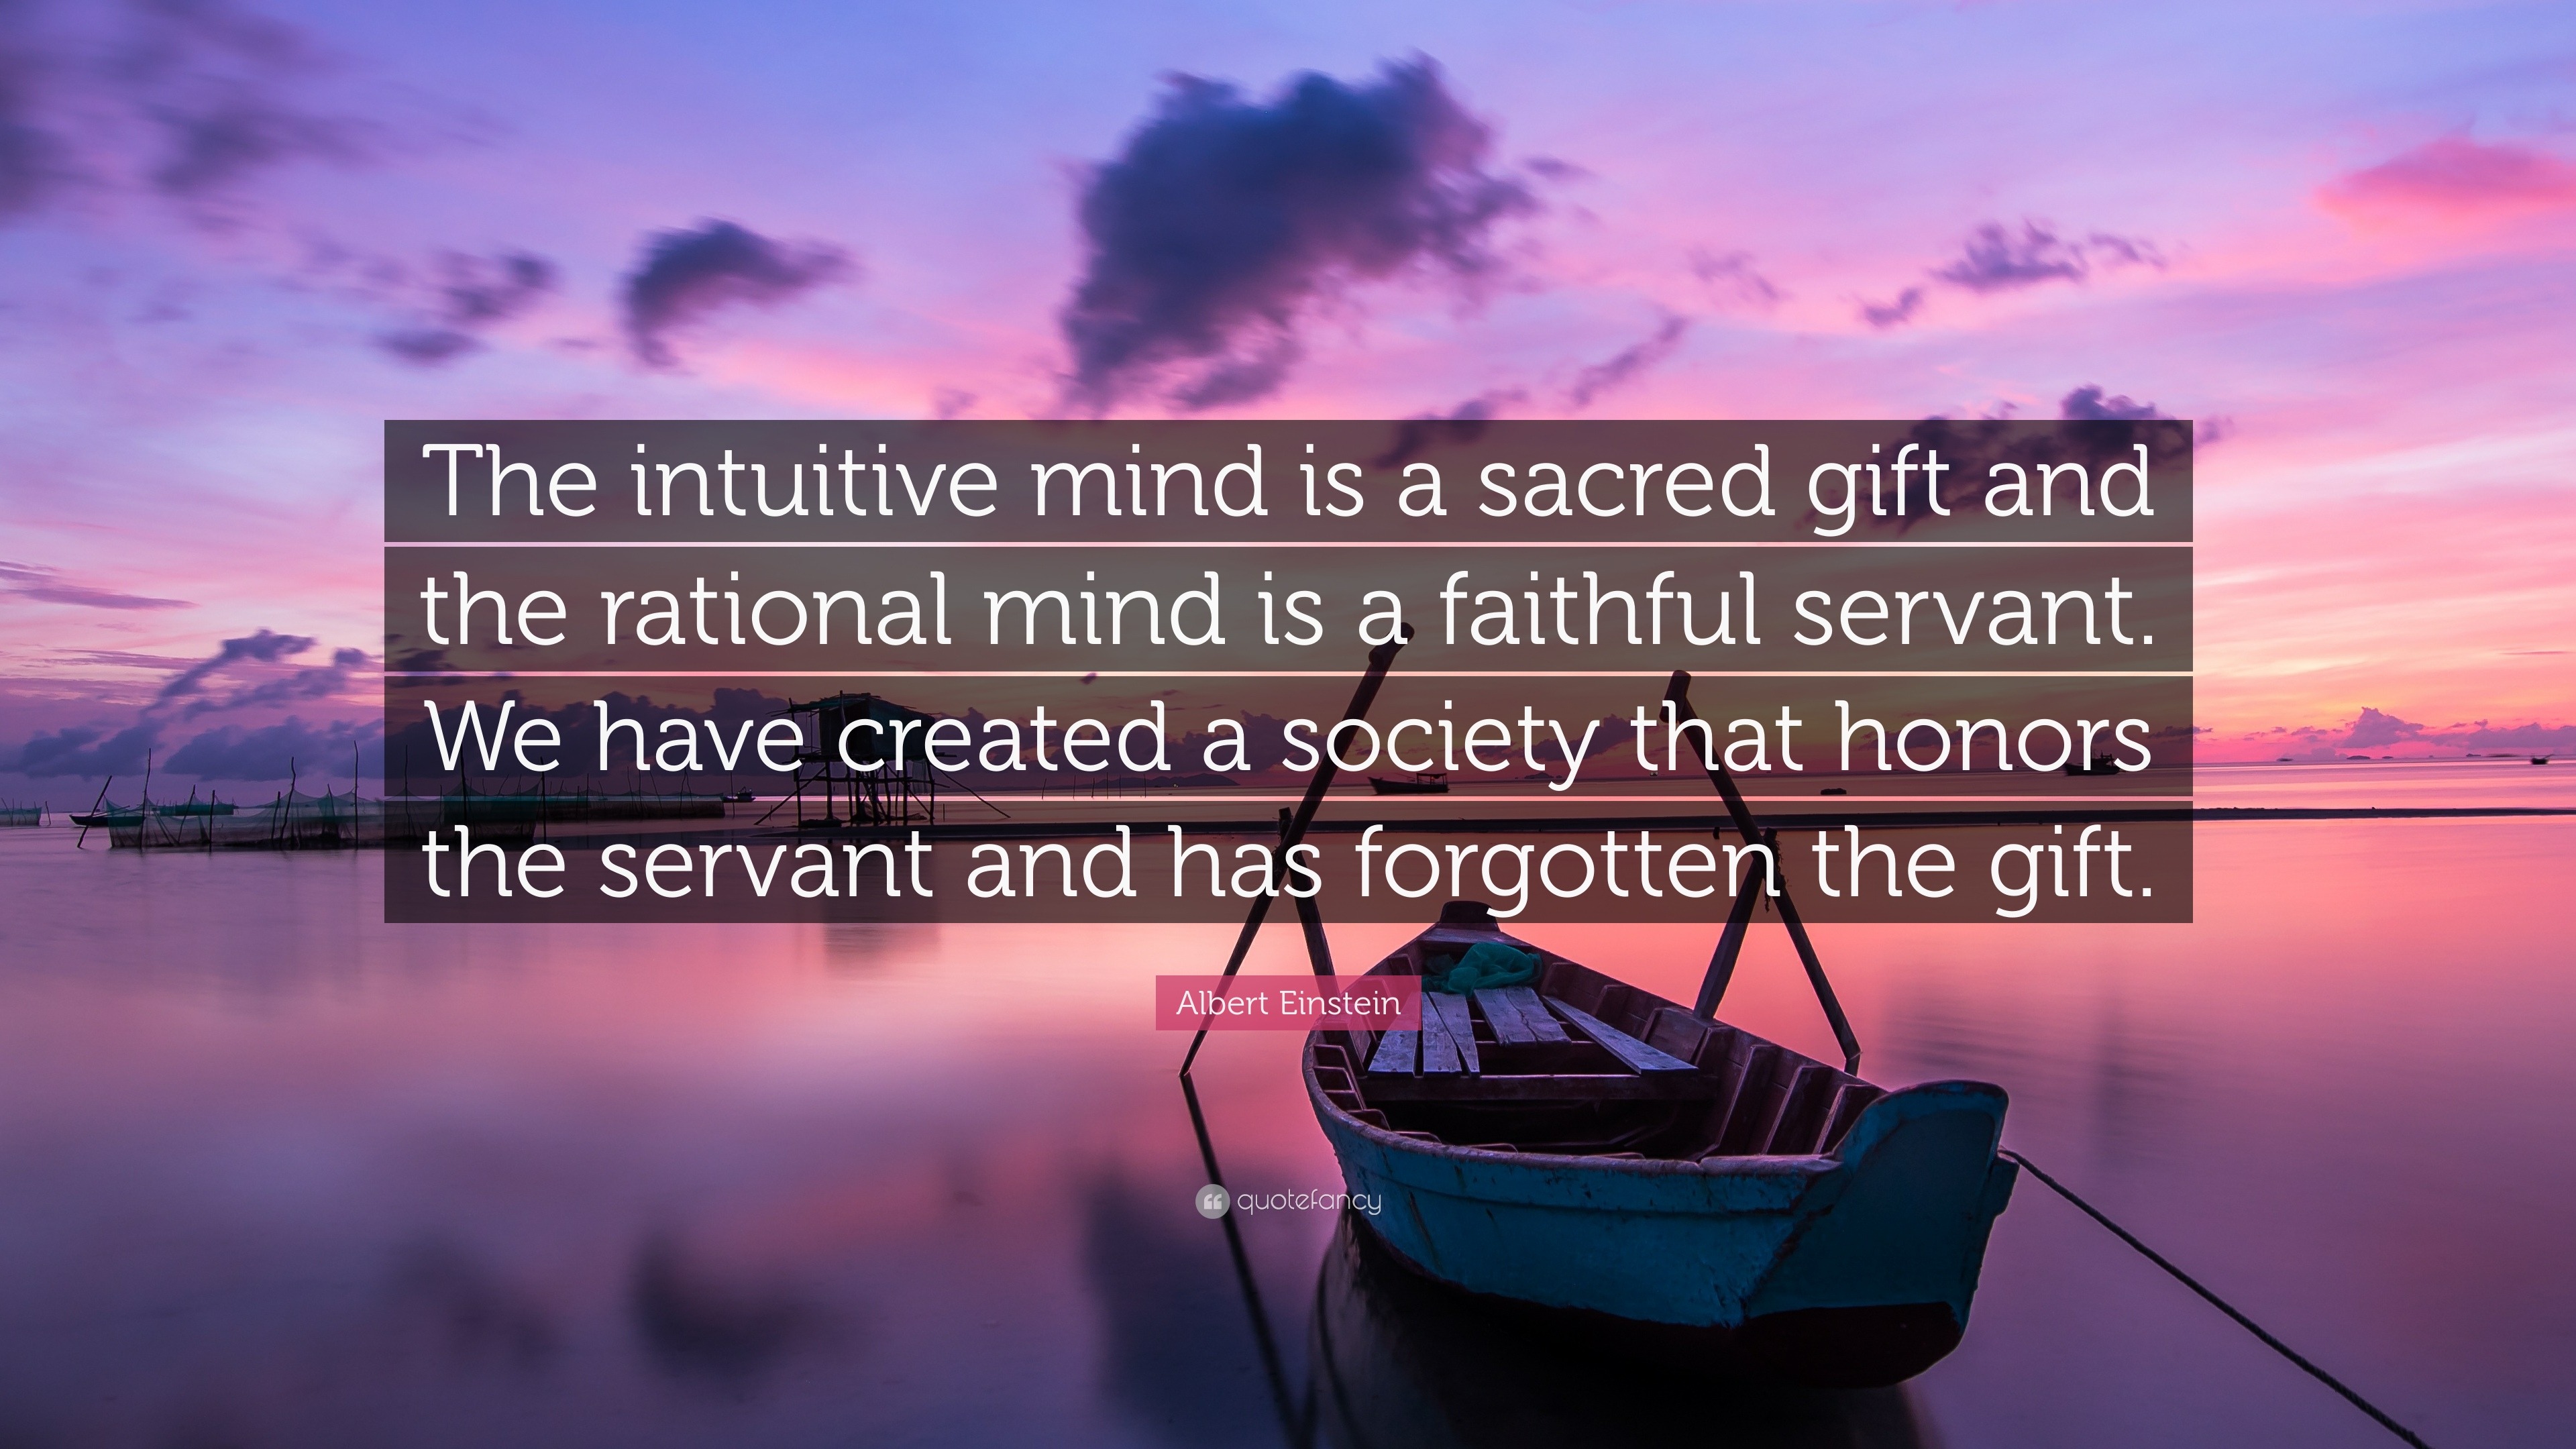 Albert Einstein Quote “The intuitive mind is a sacred gift and the